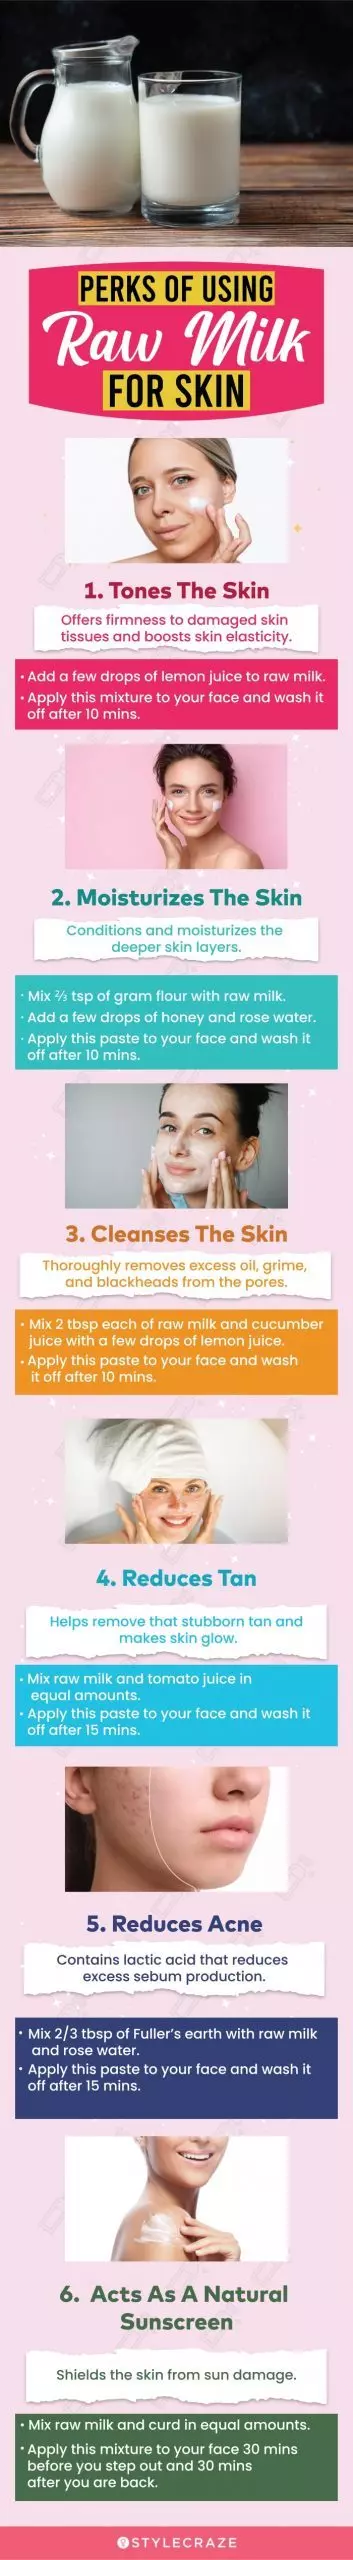 perks of using raw milk for skin (infographic)